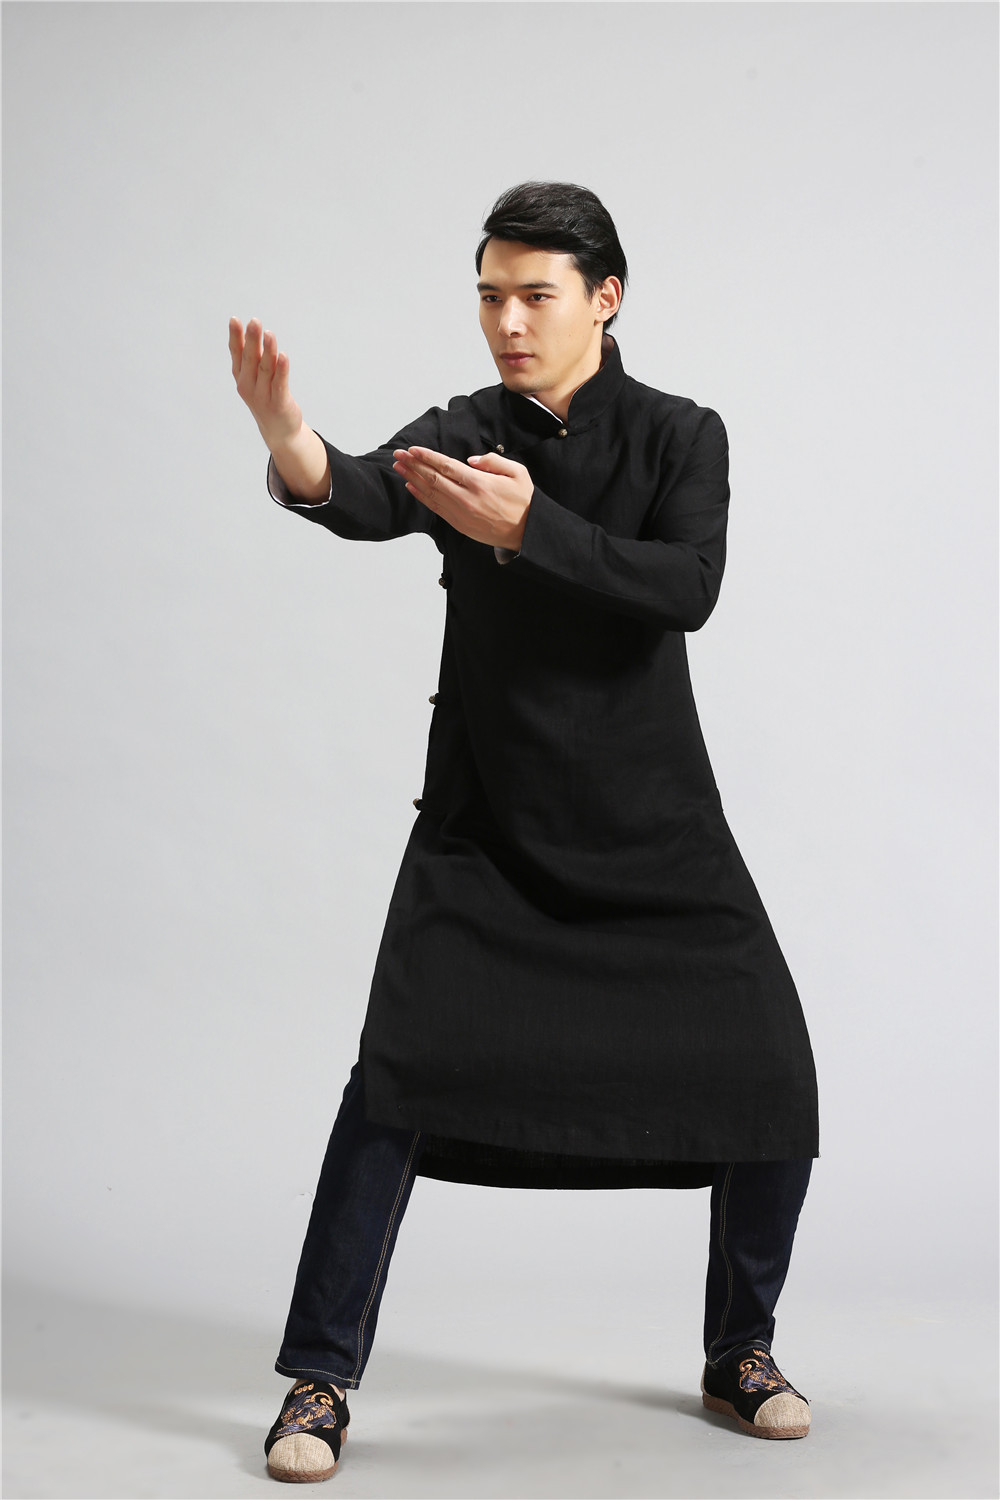 Details about   Chinese Japanese Oriental Mens Martial Kung Fu Kimono Dressing Gown mrobe1112 